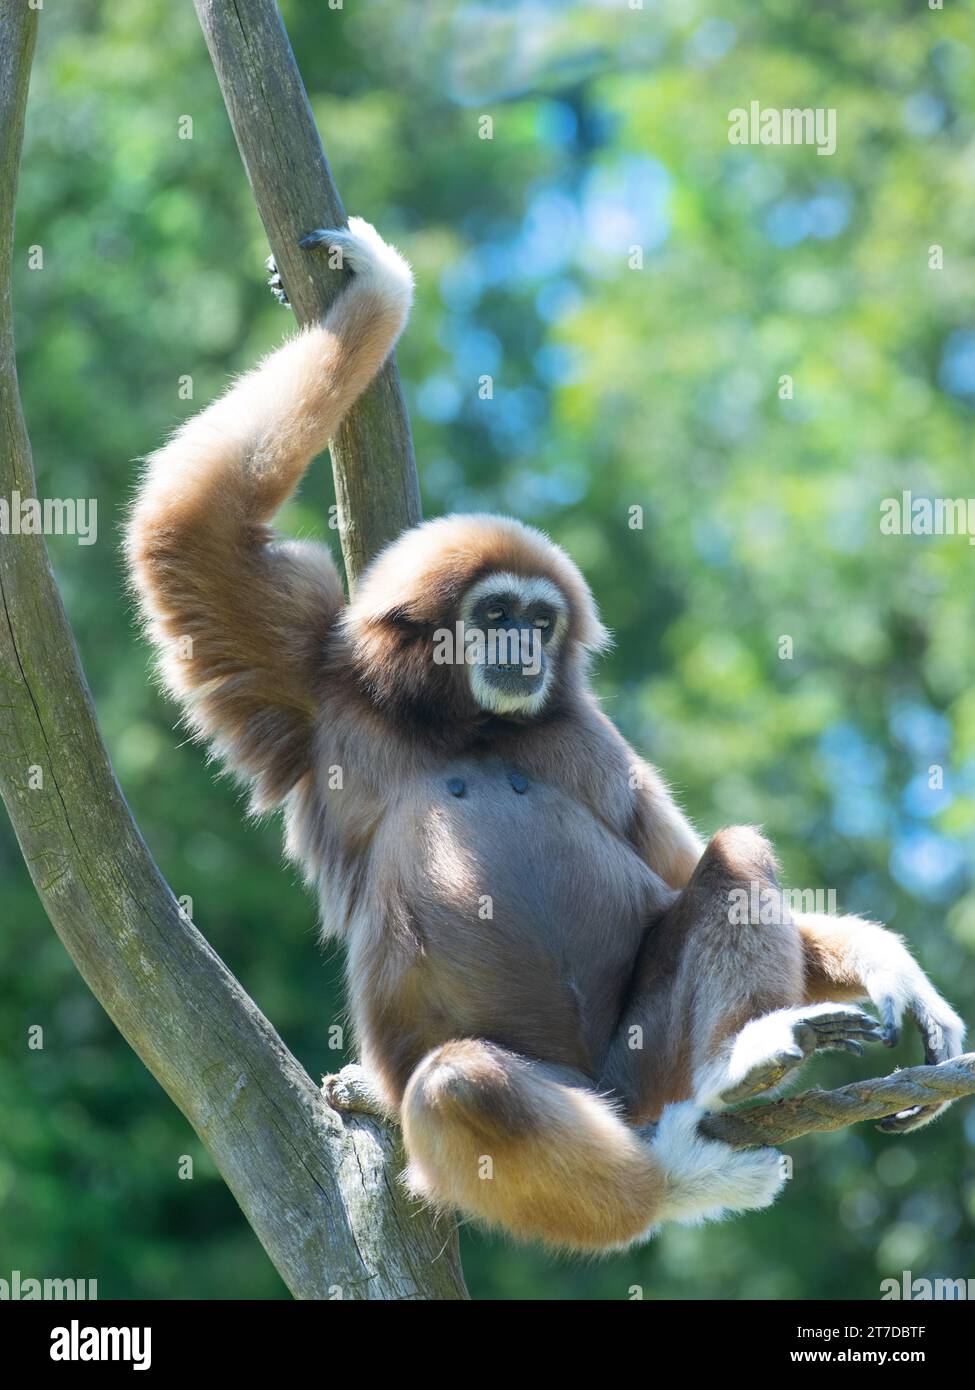 lar gibbon sitting on a tree on a green background Stock Photo